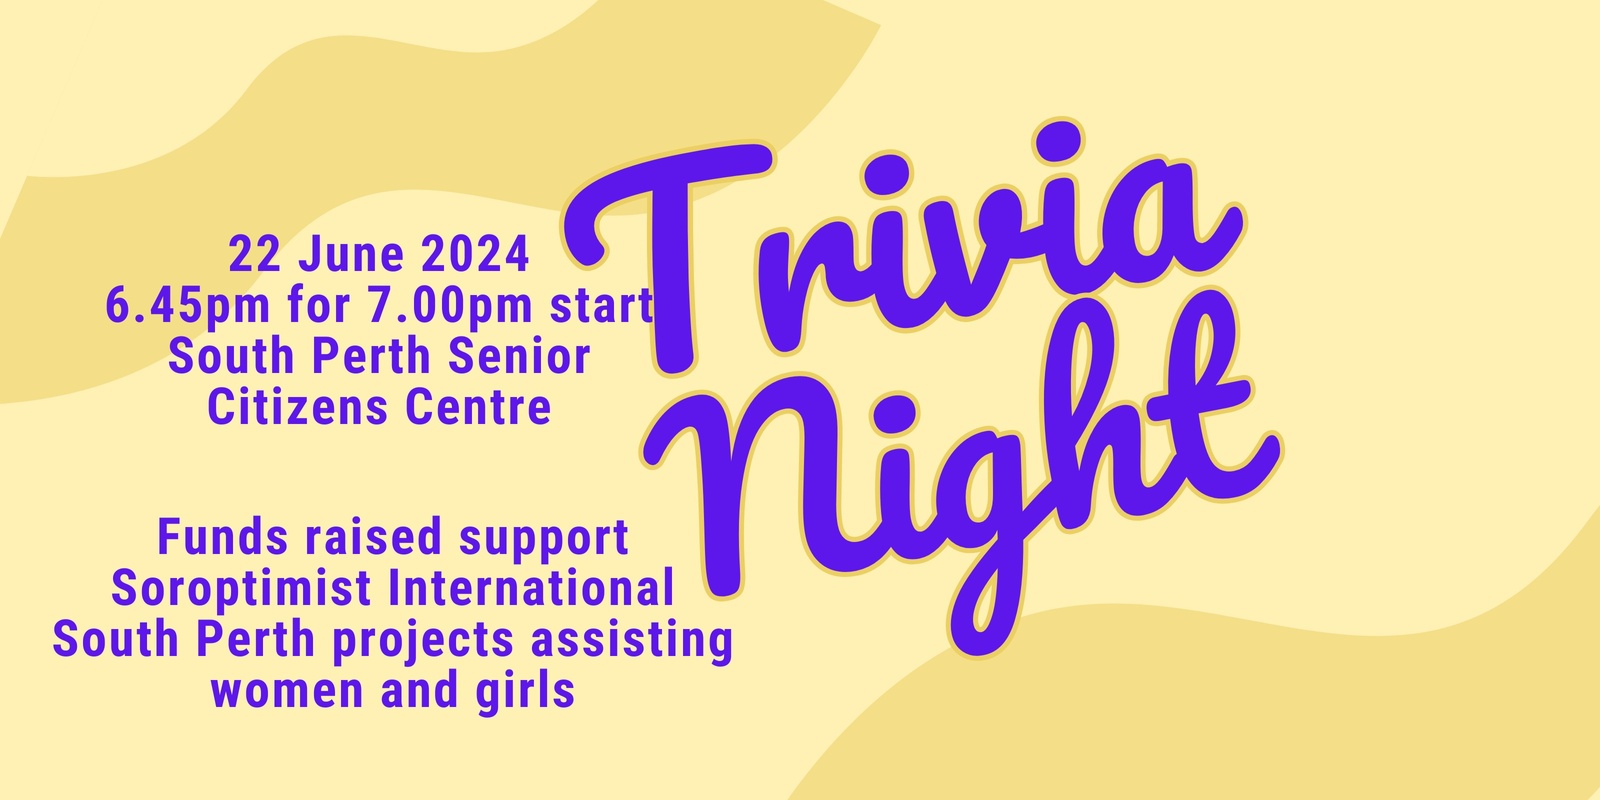 Banner image for Trivia Night